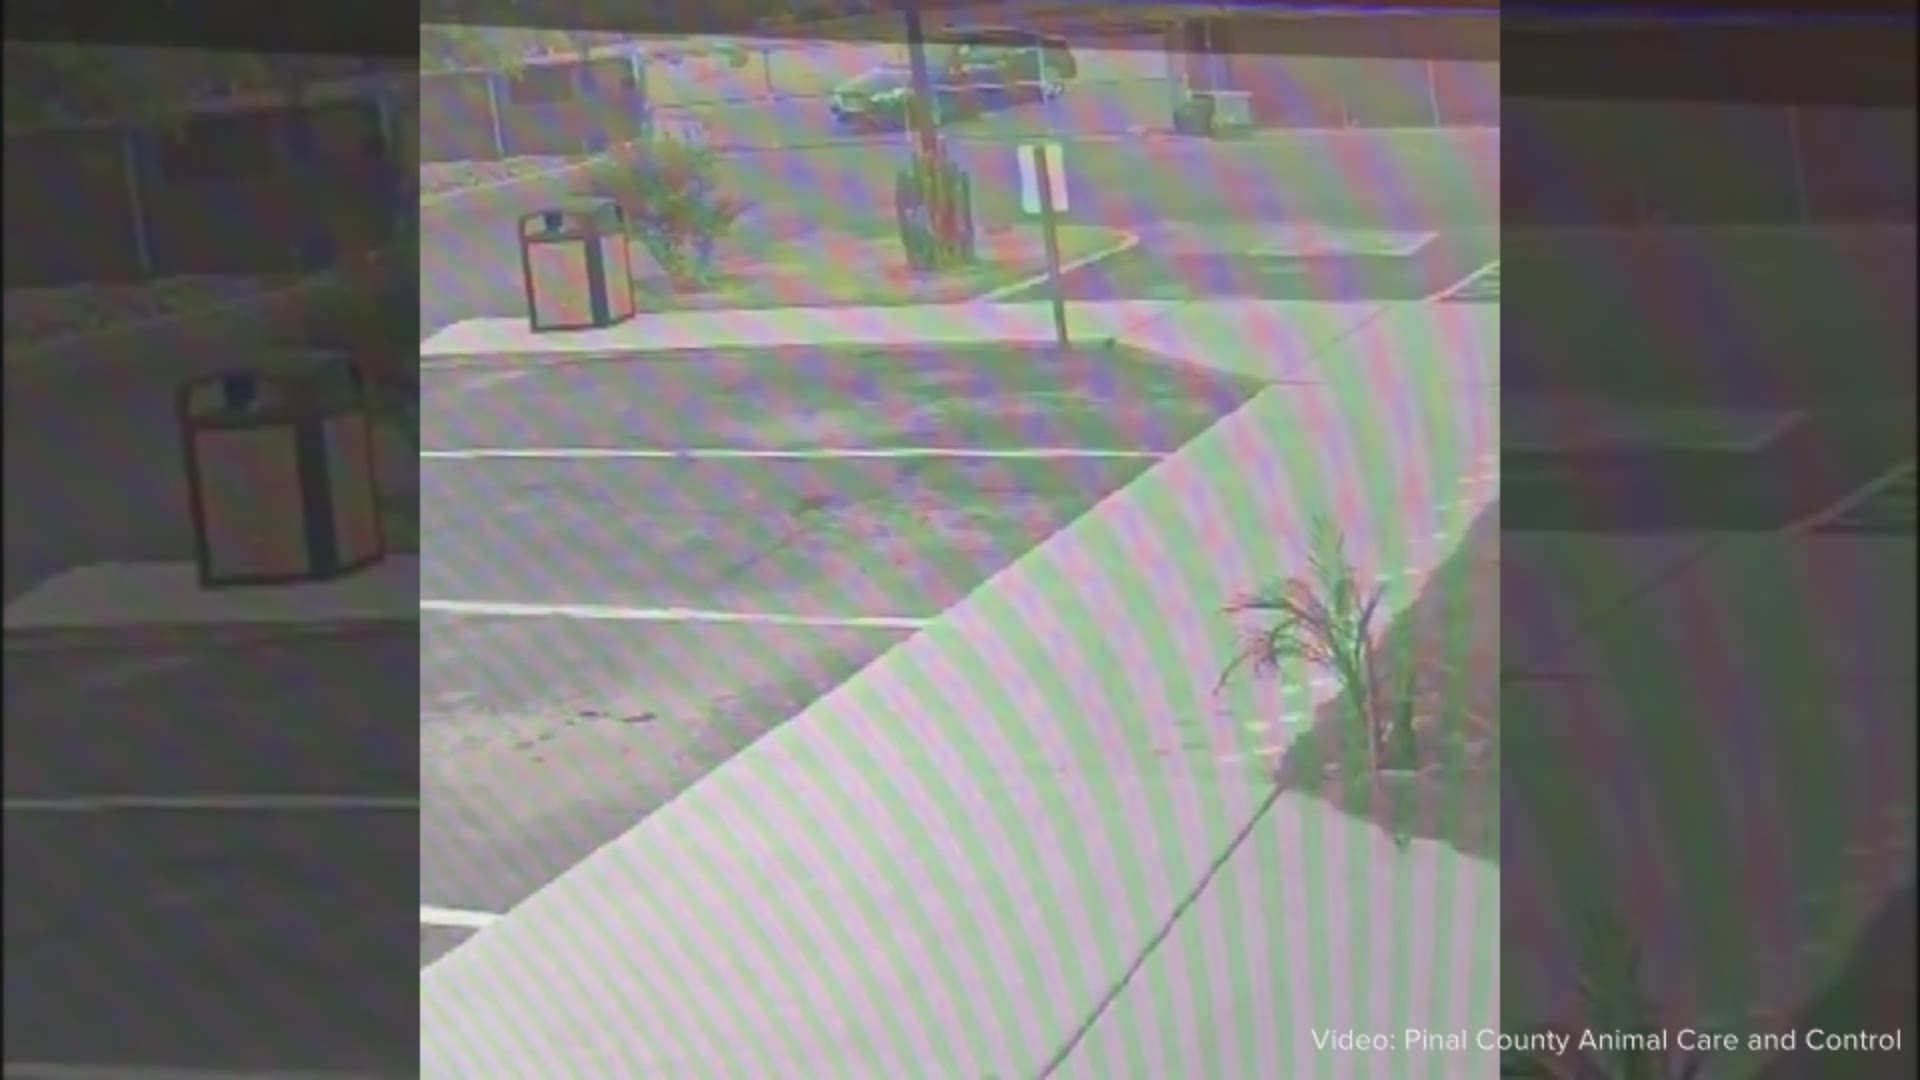 Pinal County Animal Care and Control released security footage of two people tossing two dogs over their fence while the shelter was closed.